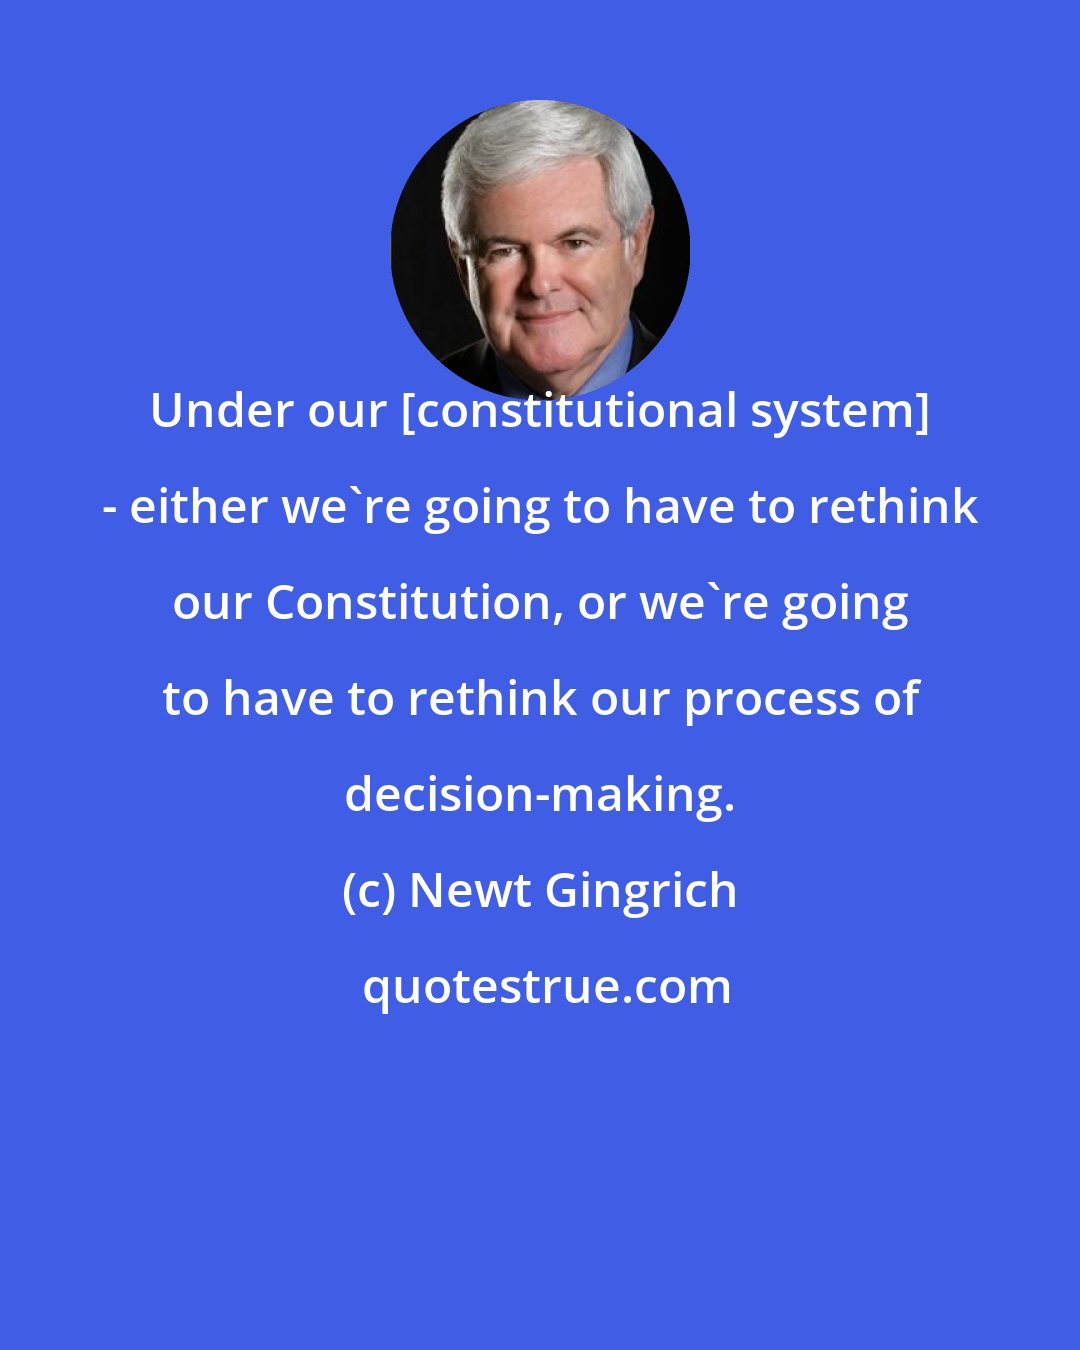 Newt Gingrich: Under our [constitutional system] - either we're going to have to rethink our Constitution, or we're going to have to rethink our process of decision-making.